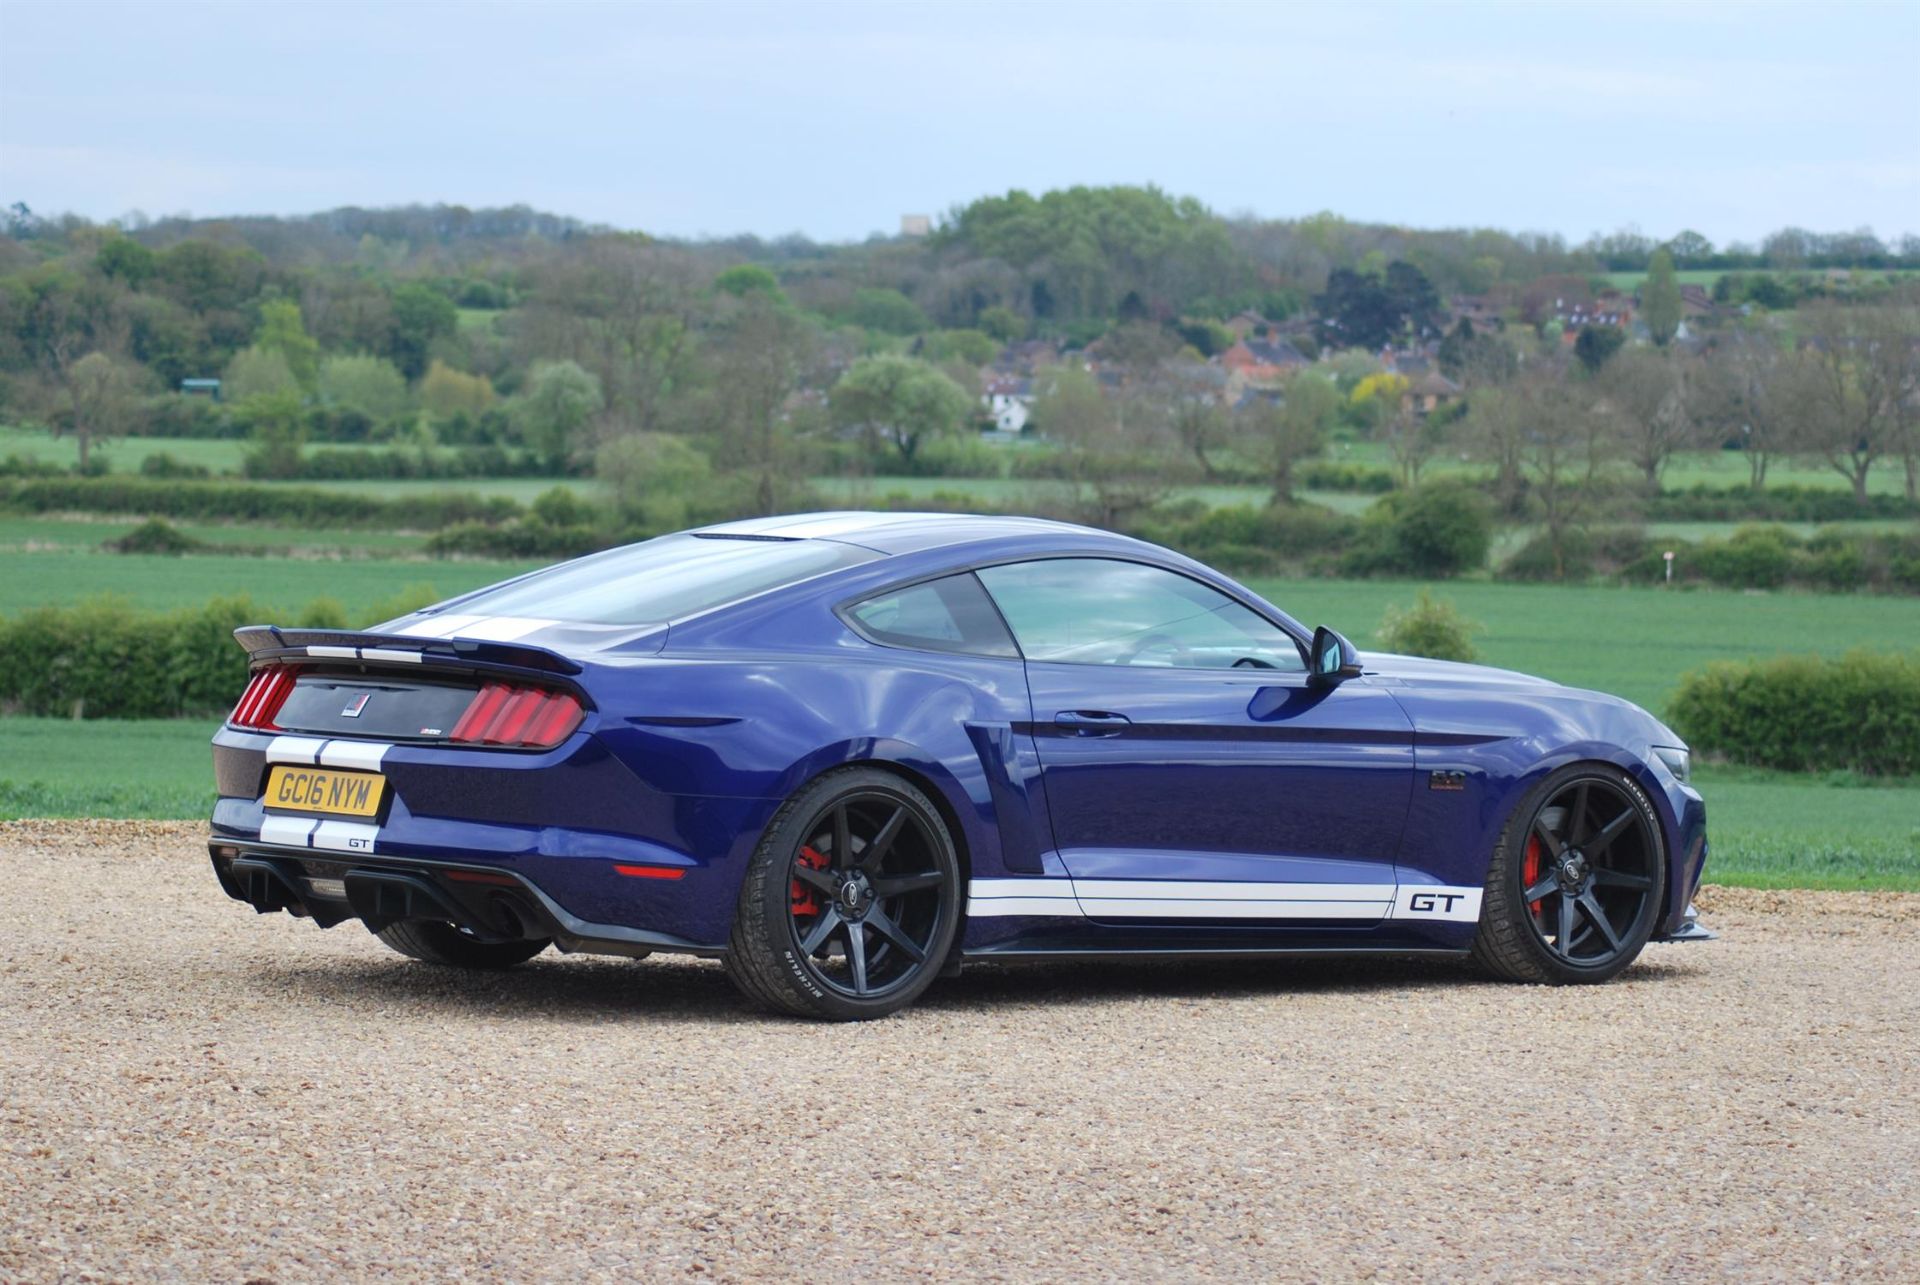 2016 Ford Mustang 5.0-Litre V8 GT S550 Roush Supercharged - Image 10 of 10